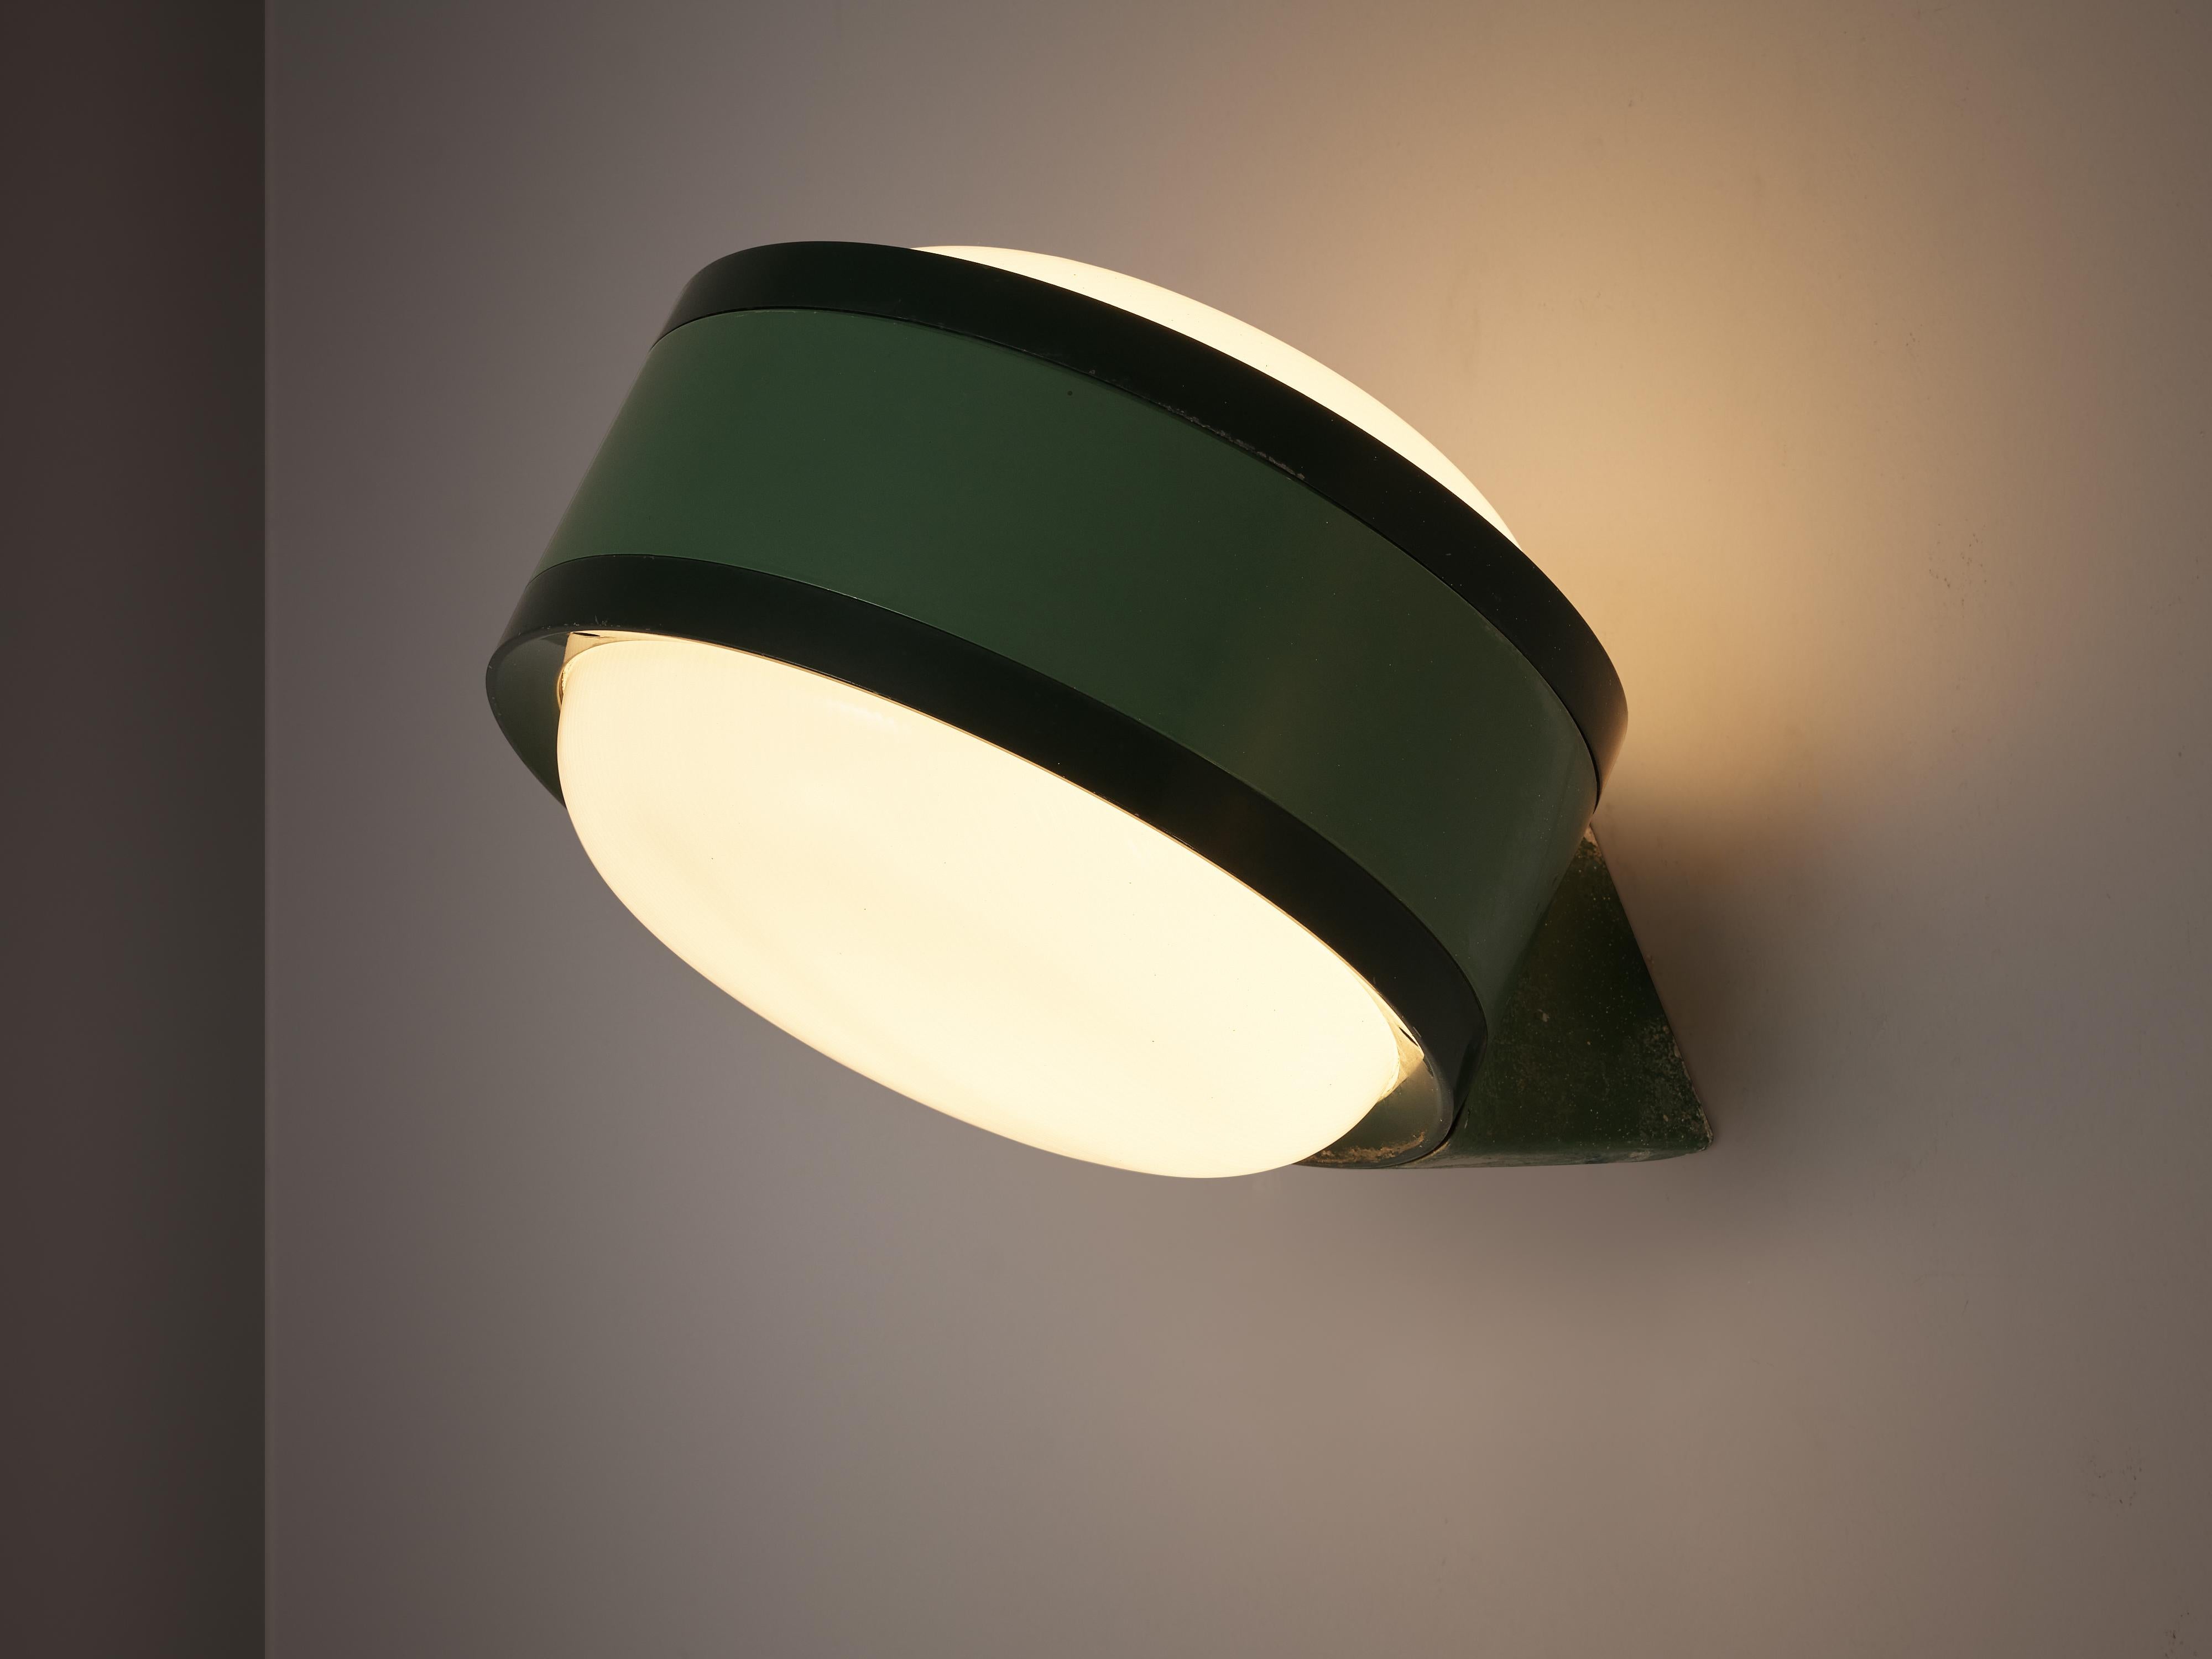 Tobia Scarpa for Flos, 'Tamburo' wall lamps, green colored aluminum, glass, Italy, 1973

Originally designed as floor lamps for outdoor use, these ‘Tamburo’ lamps have been changed into wall lamps. Now their shape can be admired even more. Not low